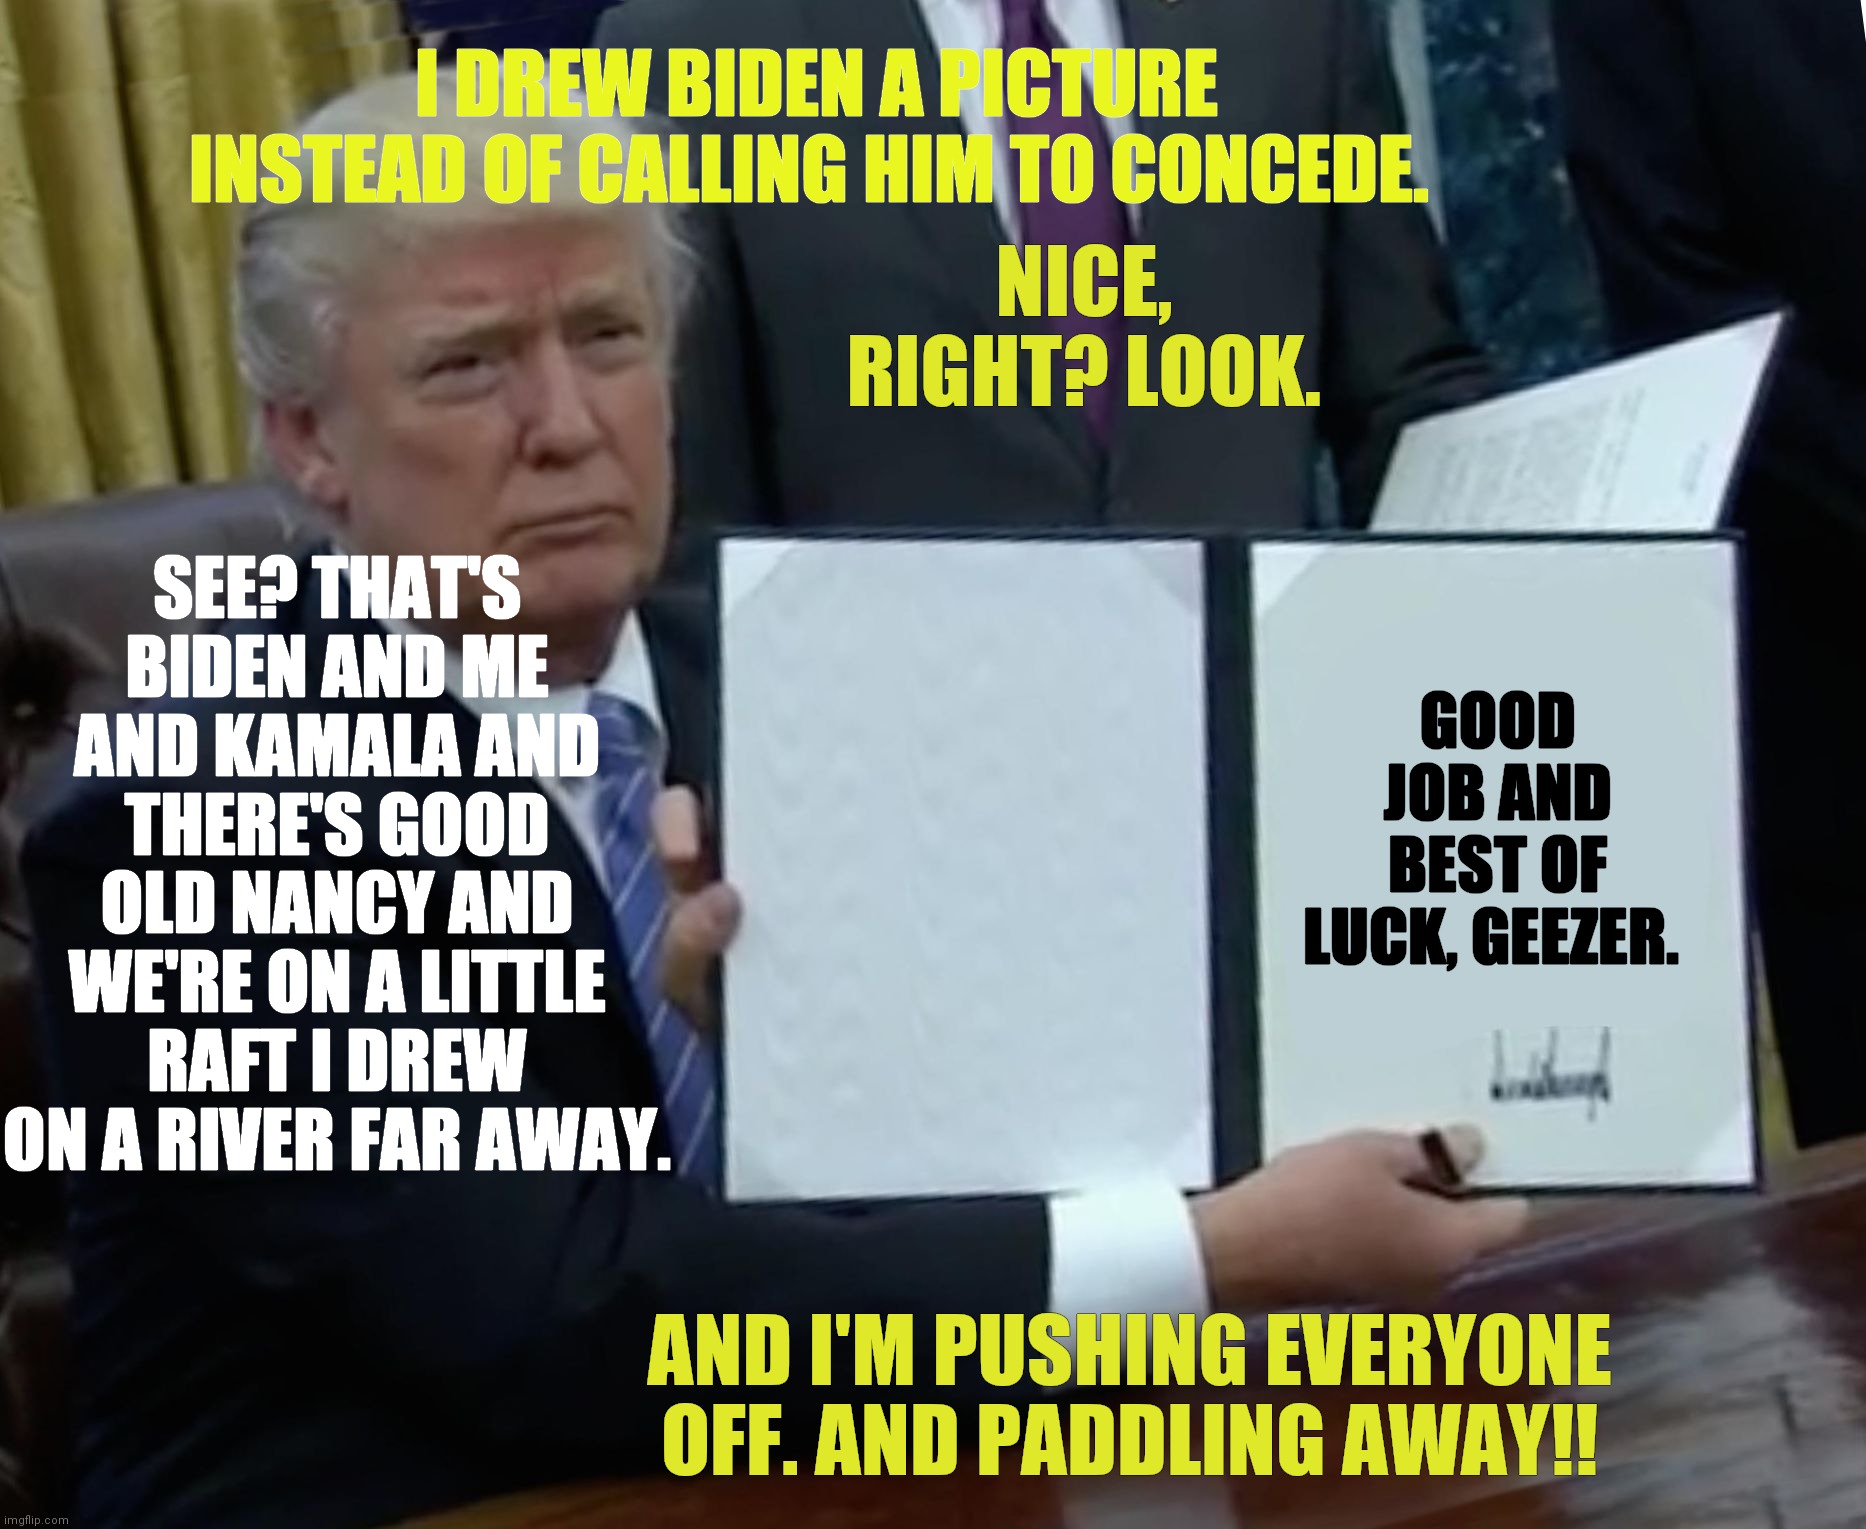 Trump makes drawing instead of consession | I DREW BIDEN A PICTURE INSTEAD OF CALLING HIM TO CONCEDE. NICE, RIGHT? LOOK. SEE? THAT'S BIDEN AND ME AND KAMALA AND THERE'S GOOD OLD NANCY AND WE'RE ON A LITTLE RAFT I DREW ON A RIVER FAR AWAY. GOOD JOB AND BEST OF LUCK, GEEZER. AND I'M PUSHING EVERYONE OFF. AND PADDLING AWAY!! | image tagged in memes,trump,consession,biden,election | made w/ Imgflip meme maker